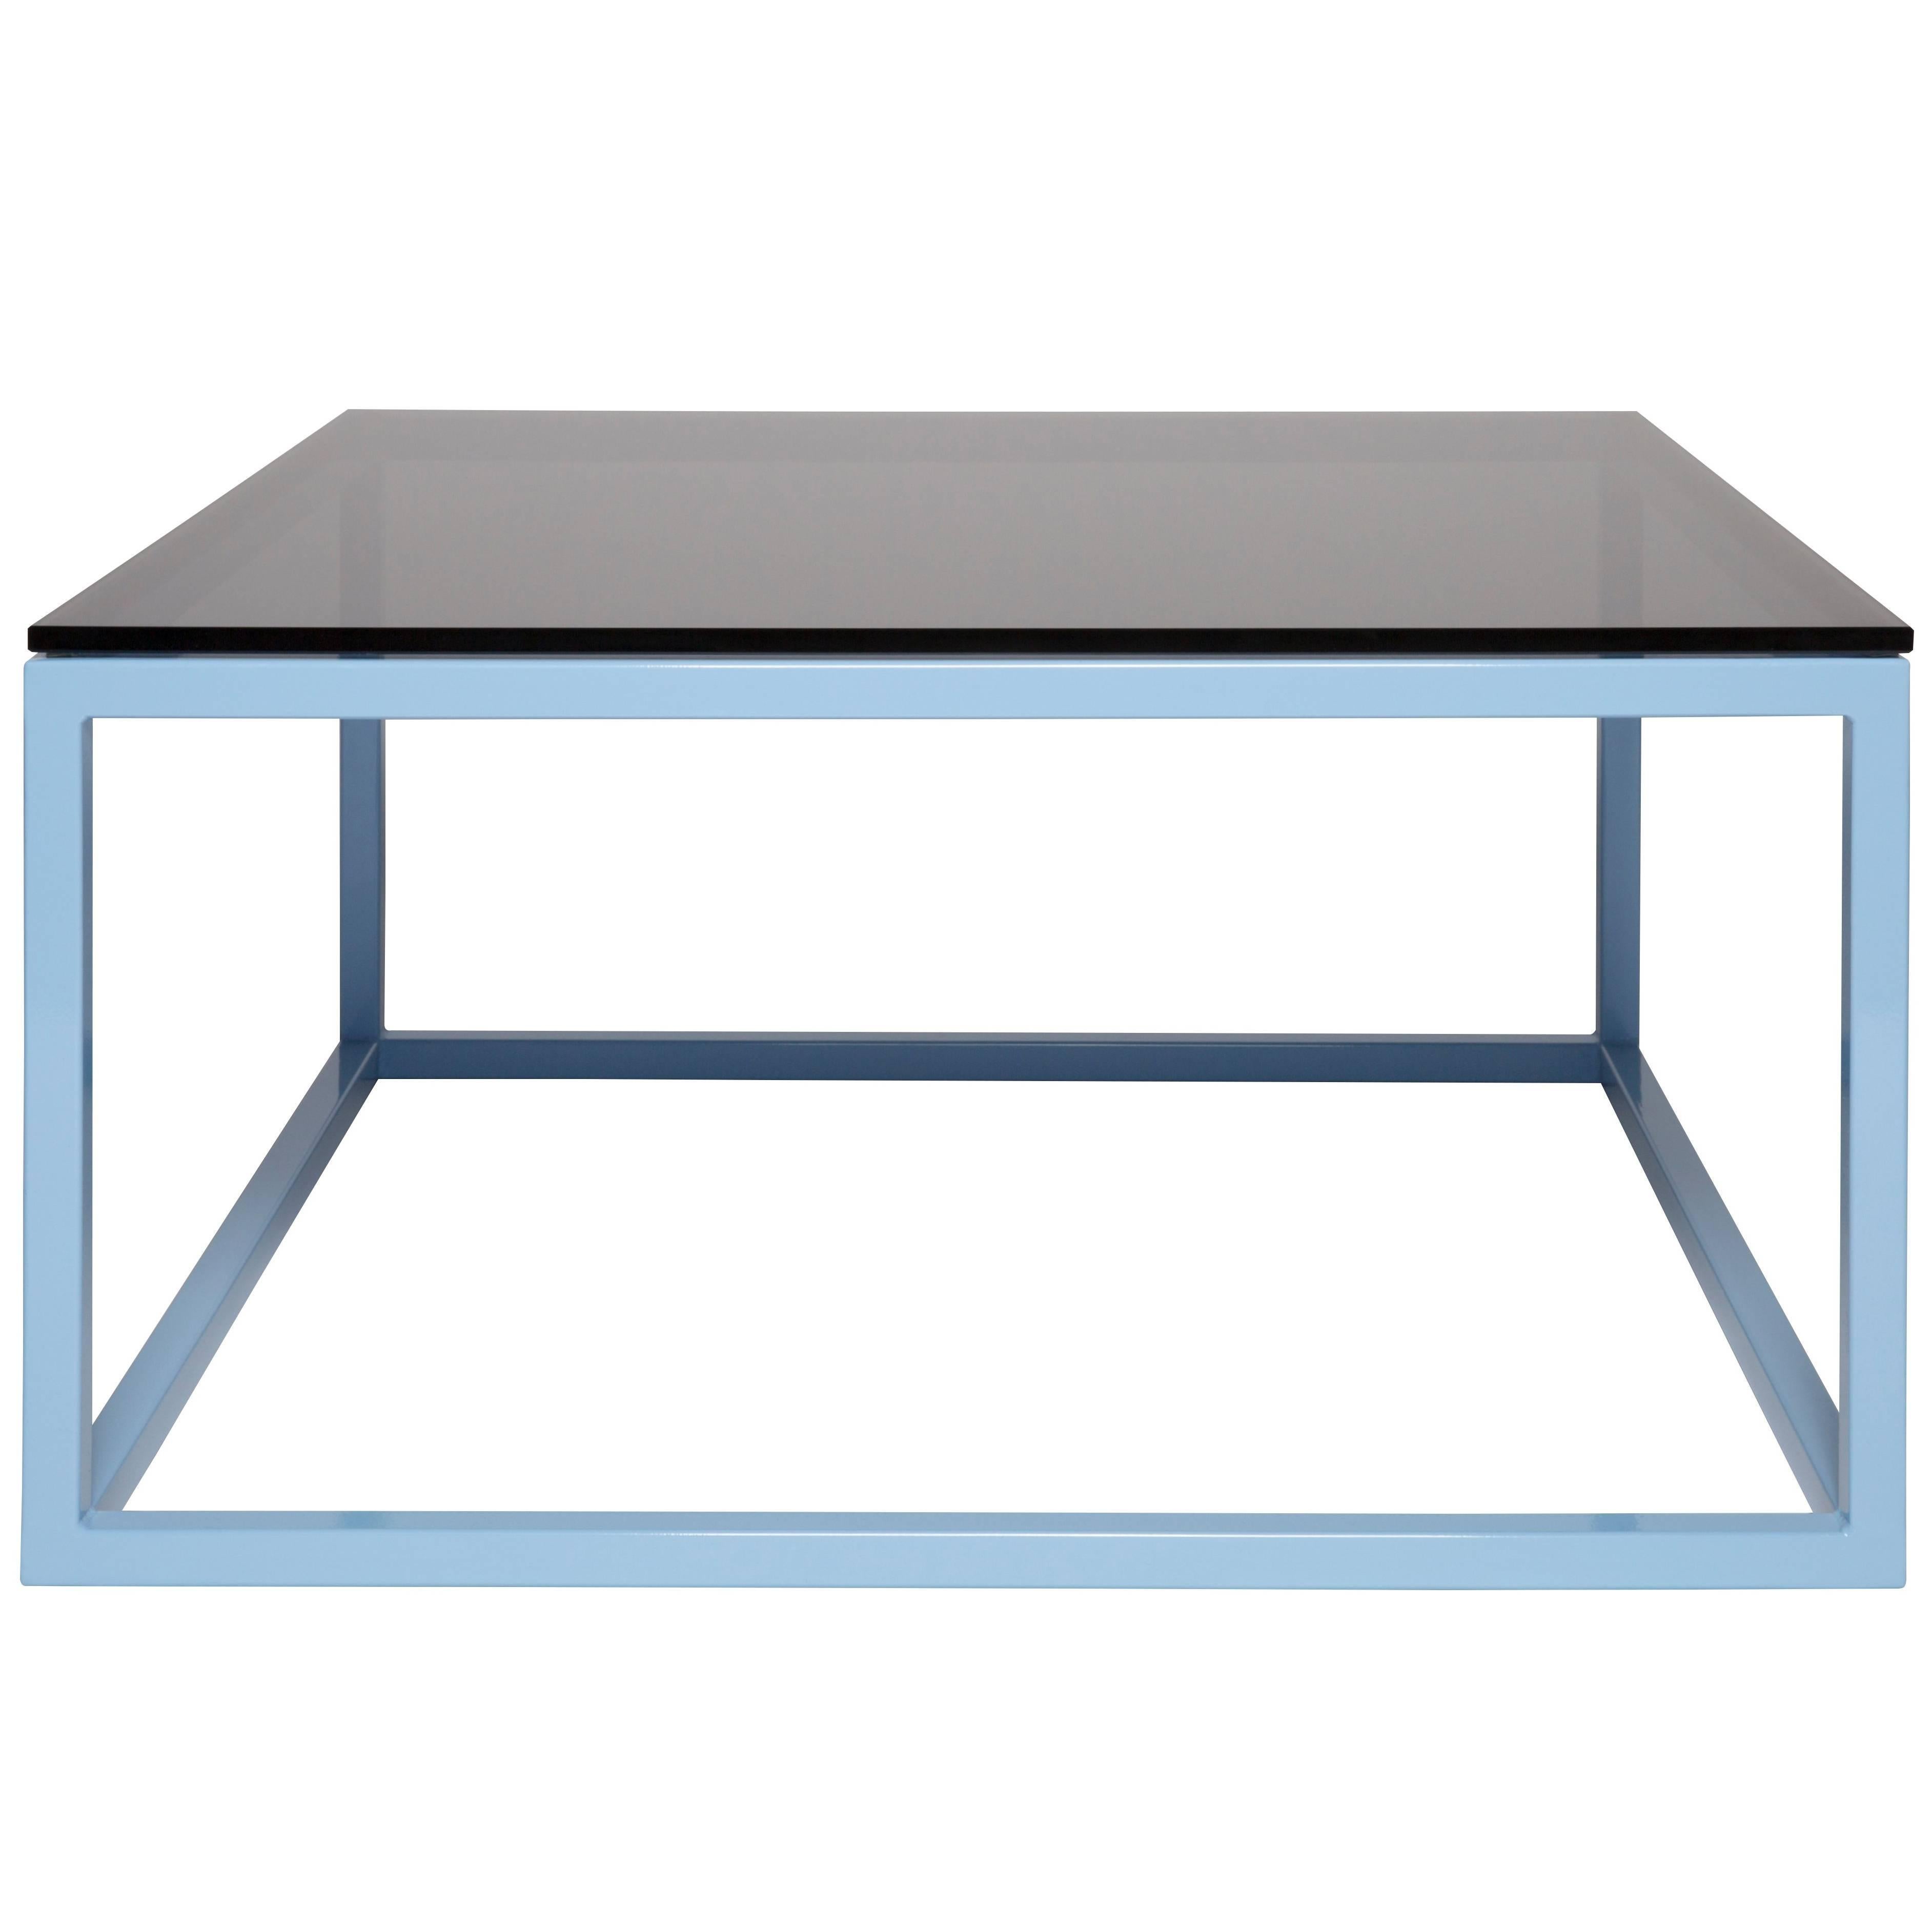 Frame Coffee Table by Pieces, Modern Customizable Cocktail Table